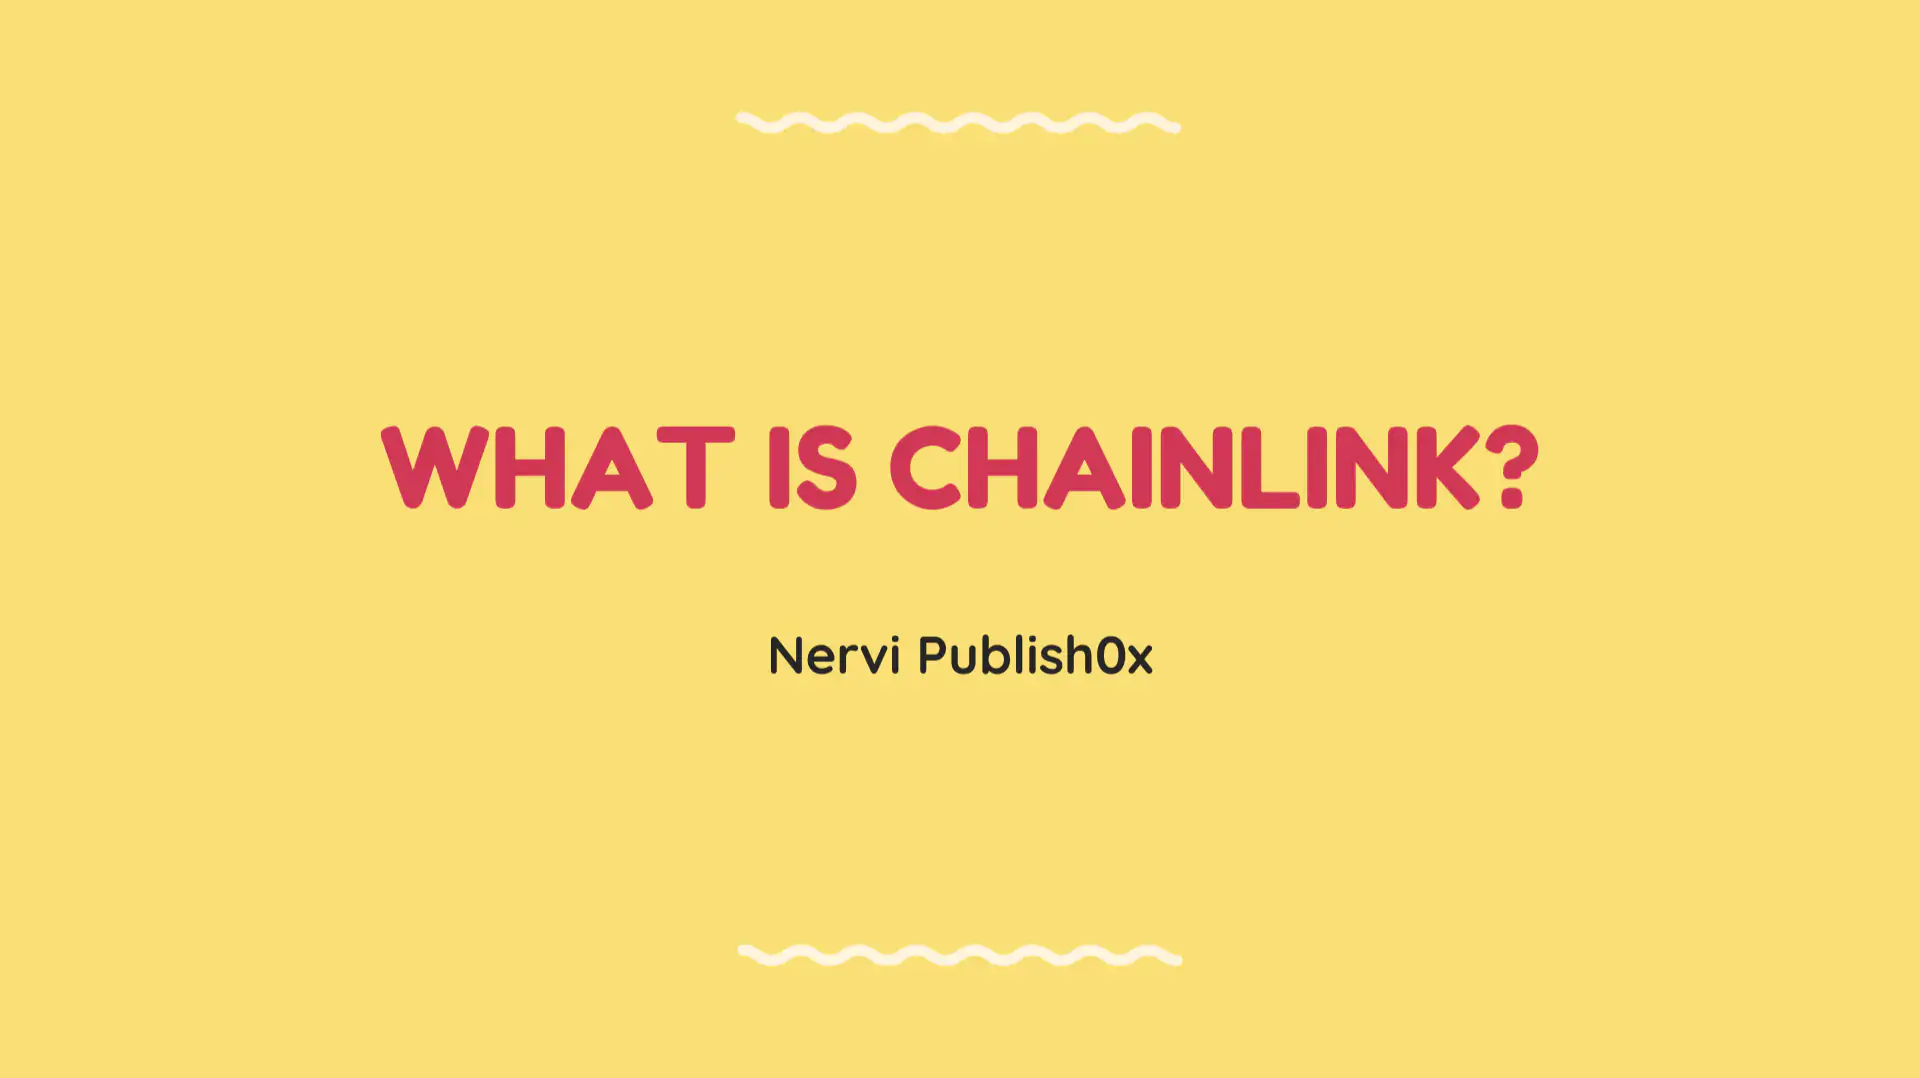 What is Chainlink (LINK)?